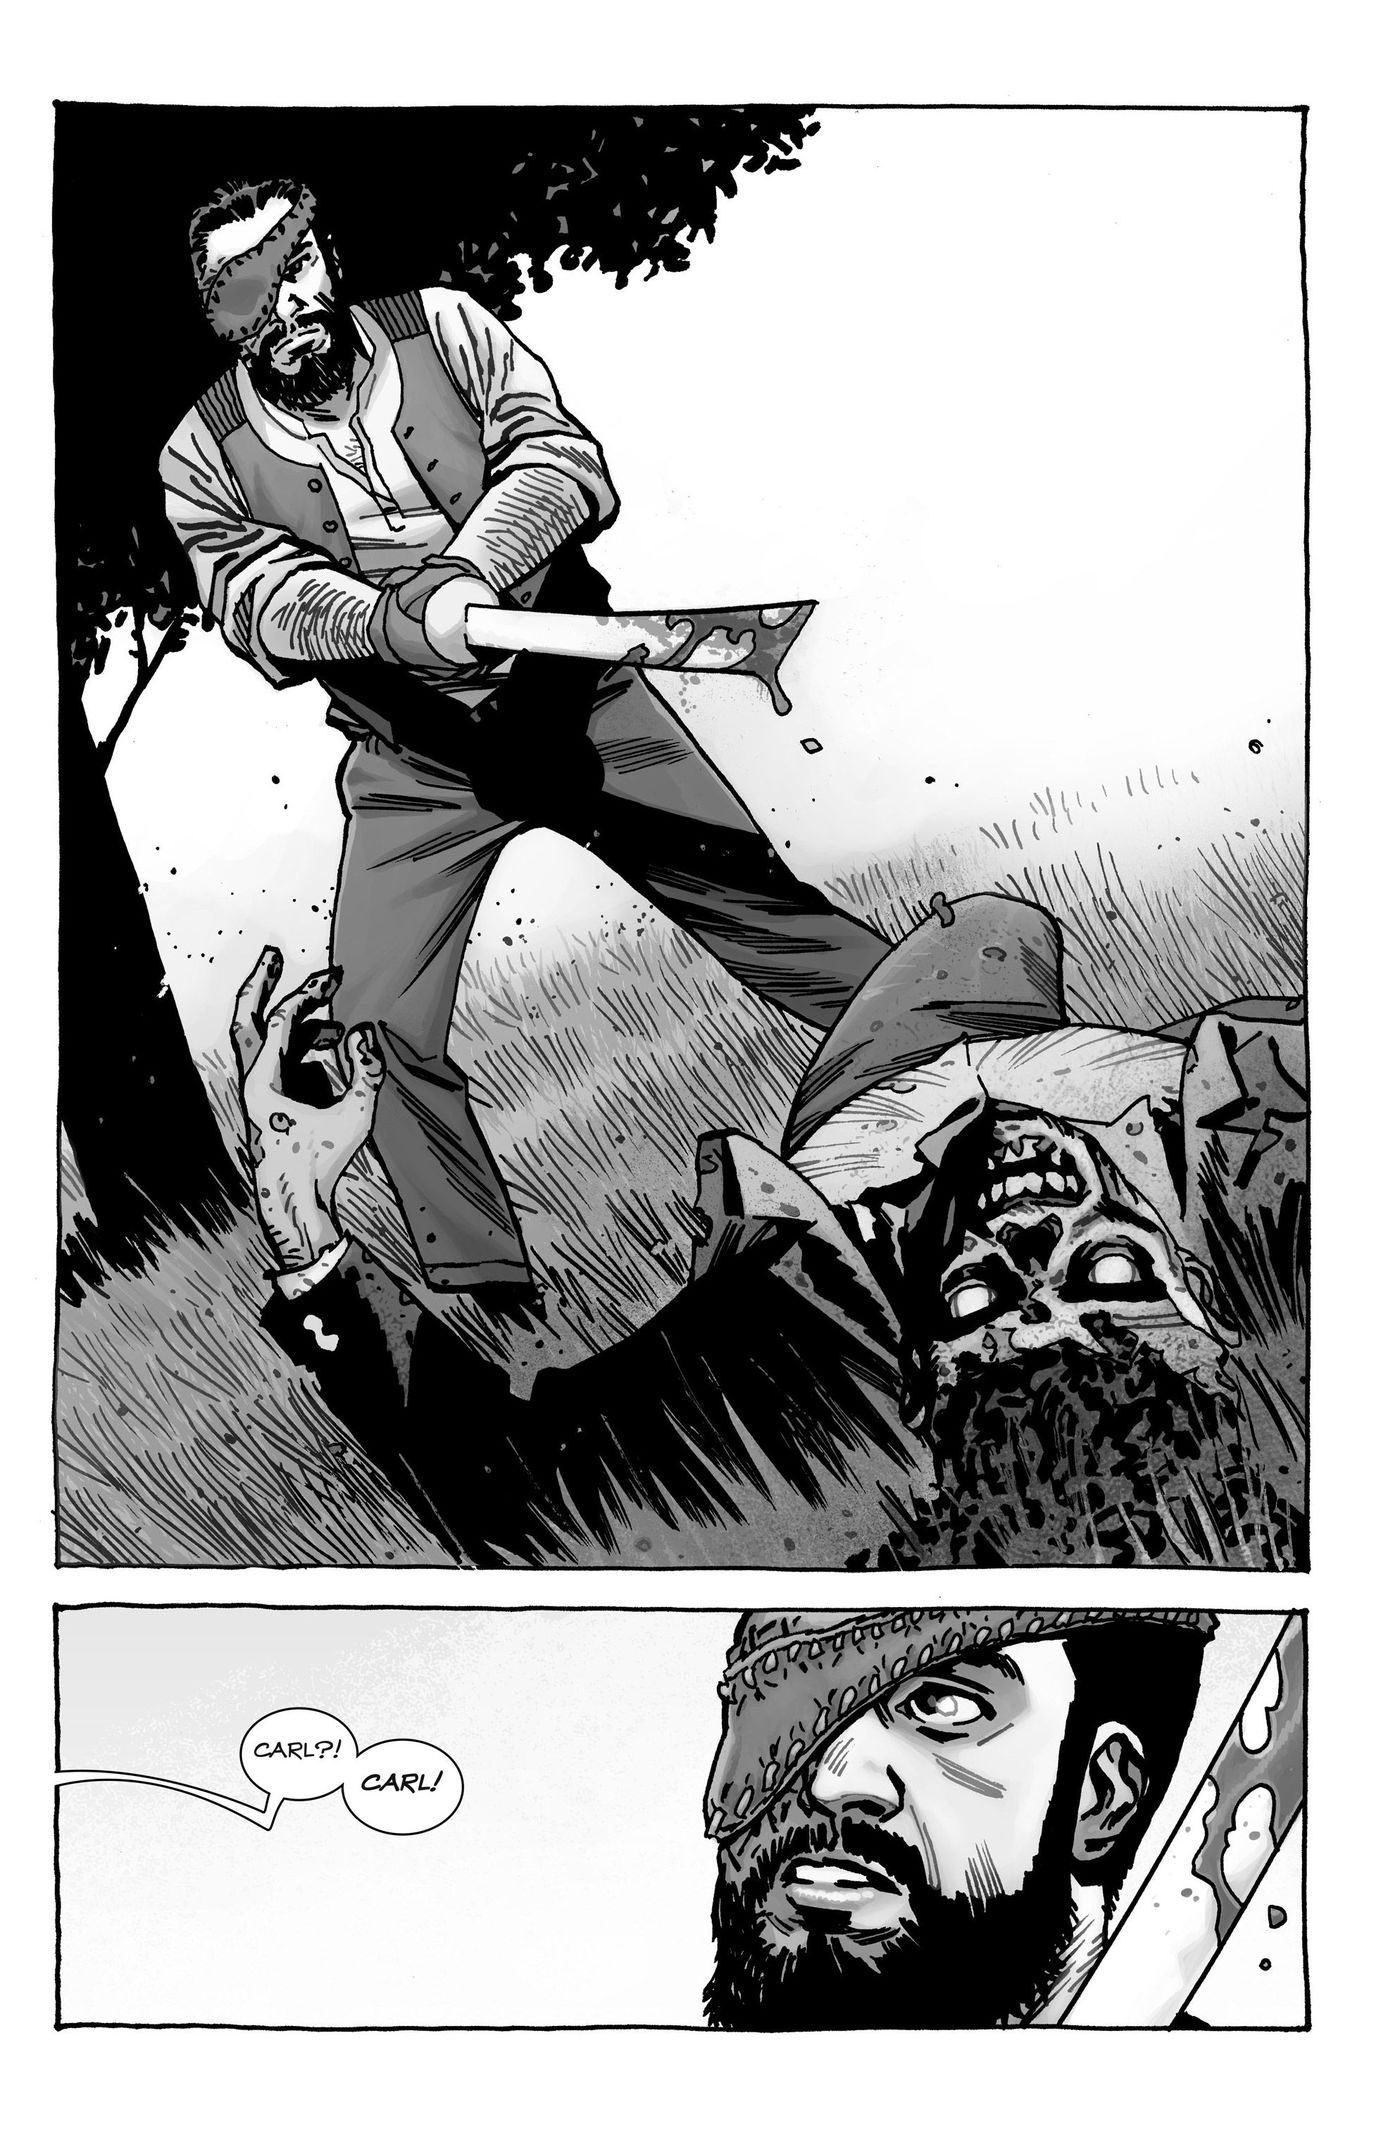 Analysis of The Walking Dead's surprise finale in issue #193